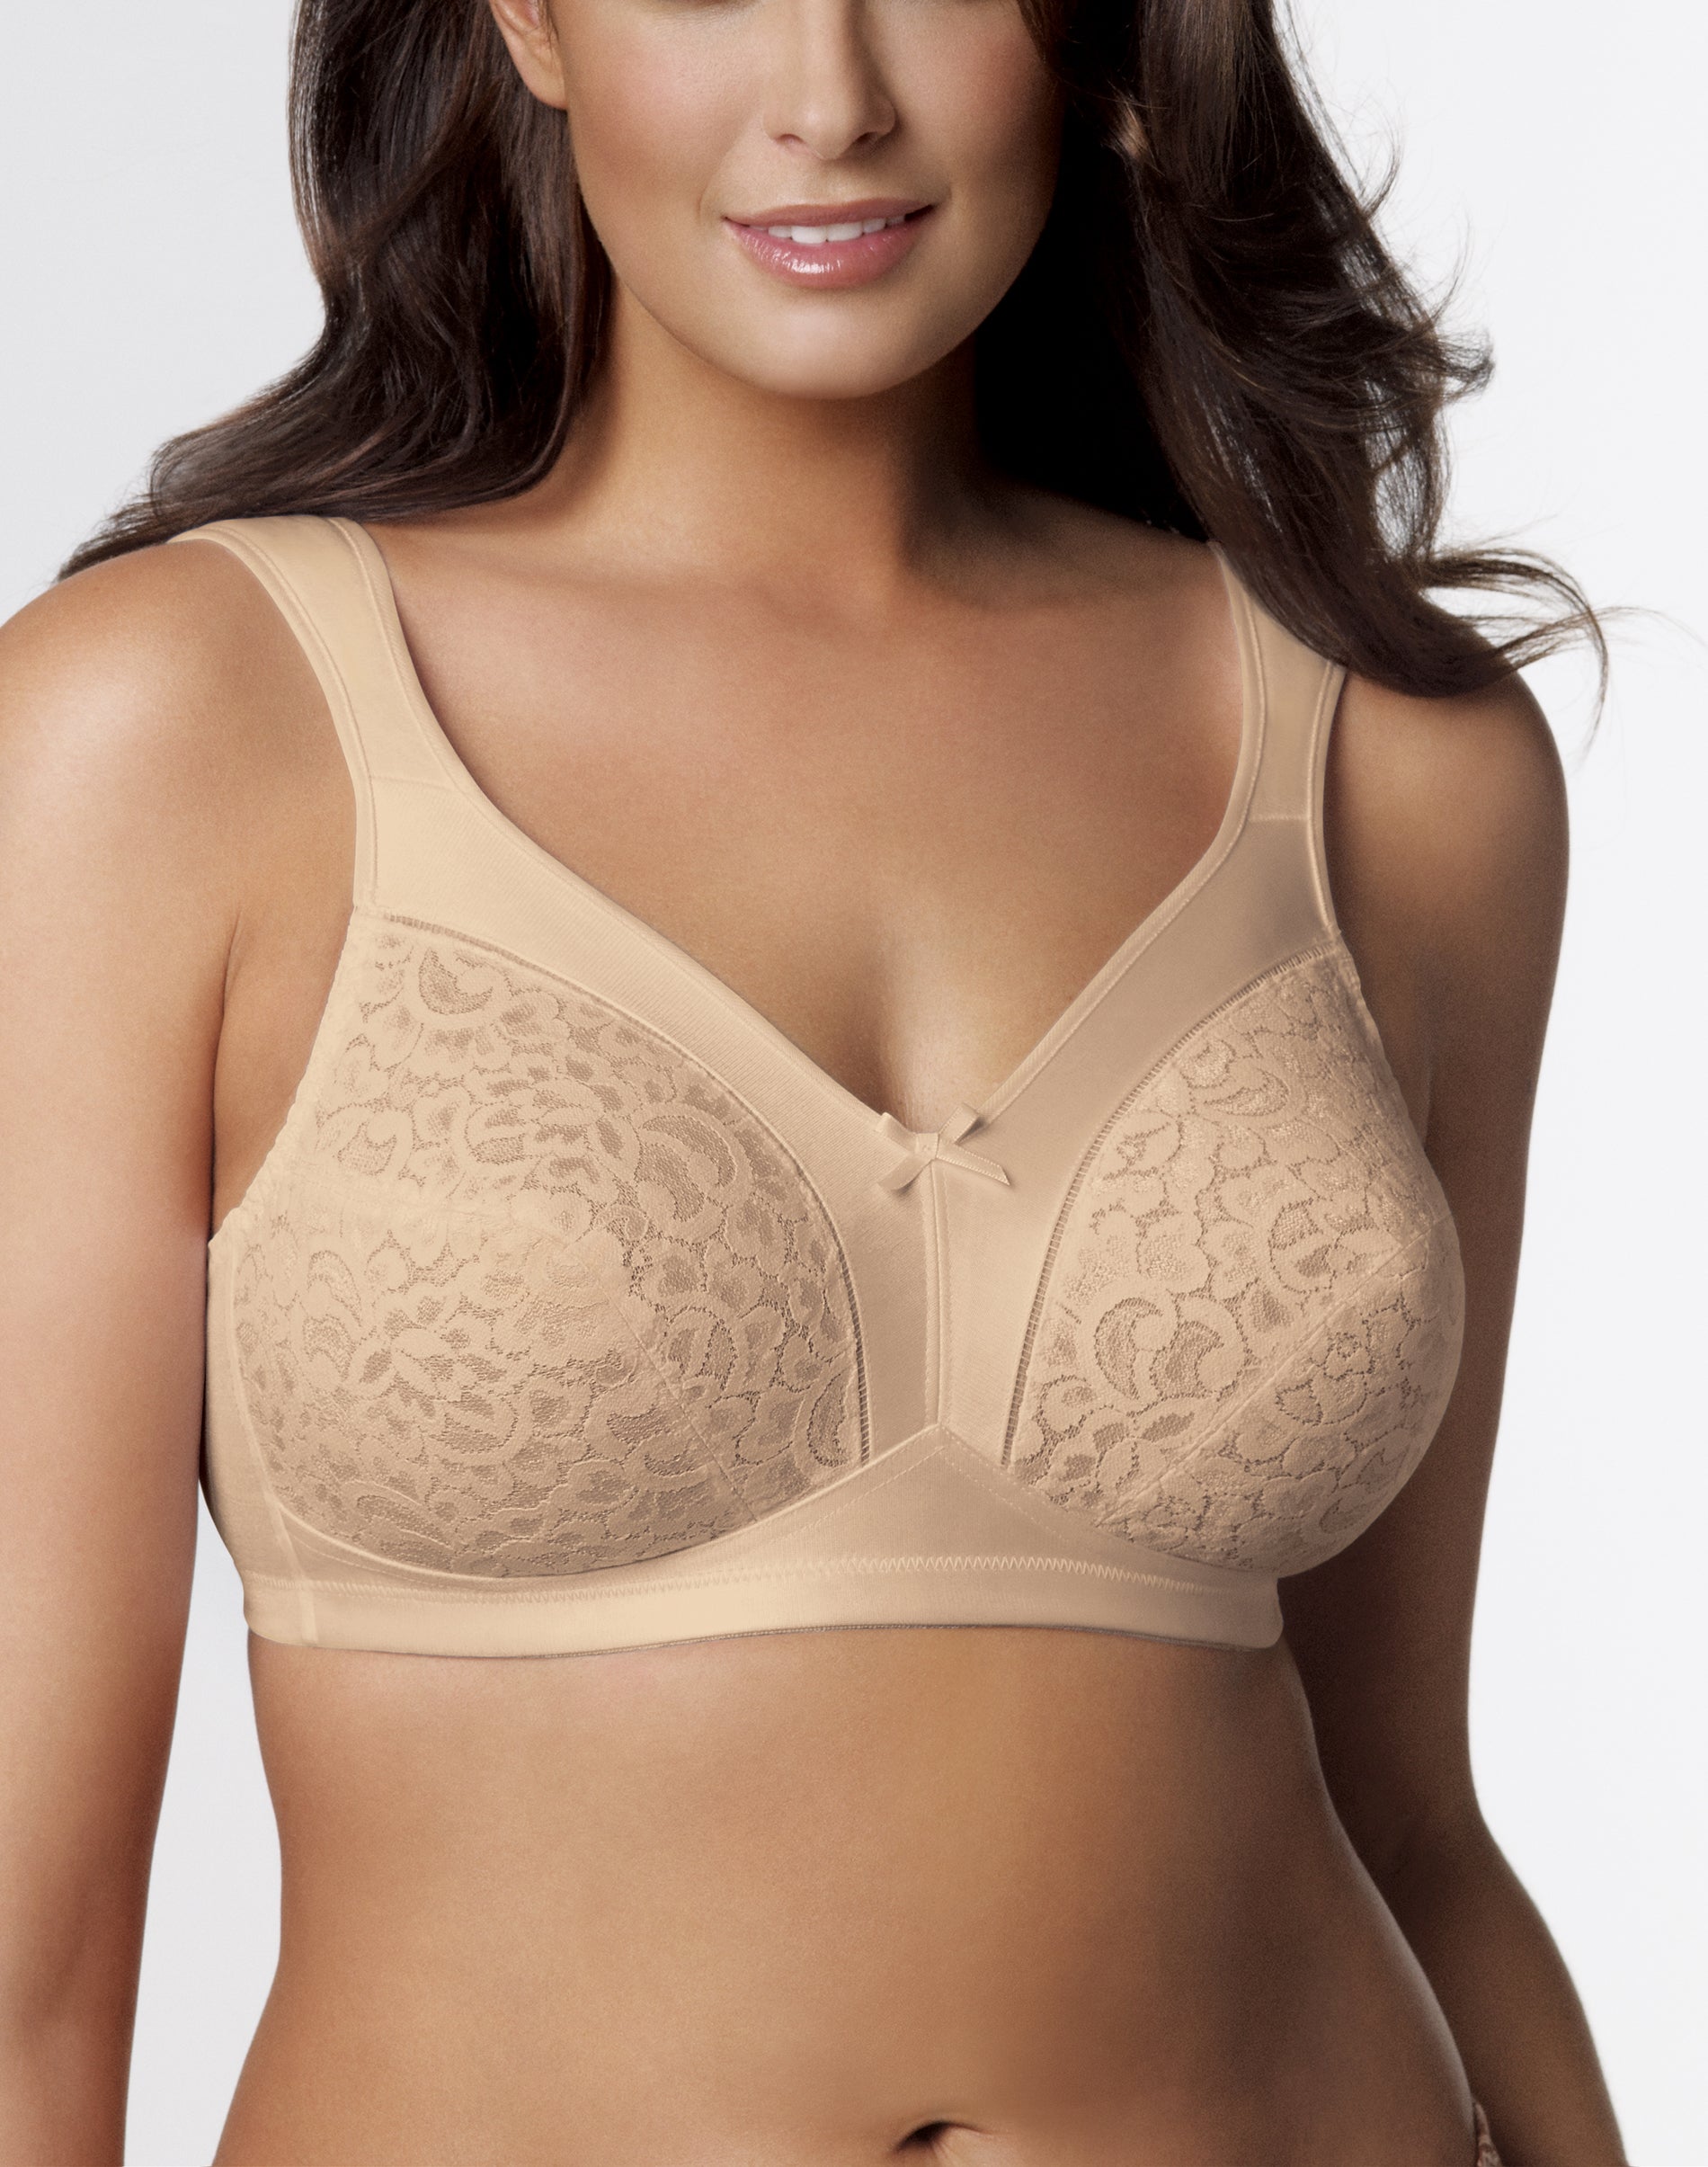 Playtex Secrets Perfectly Smooth Wire-free Bra in Black